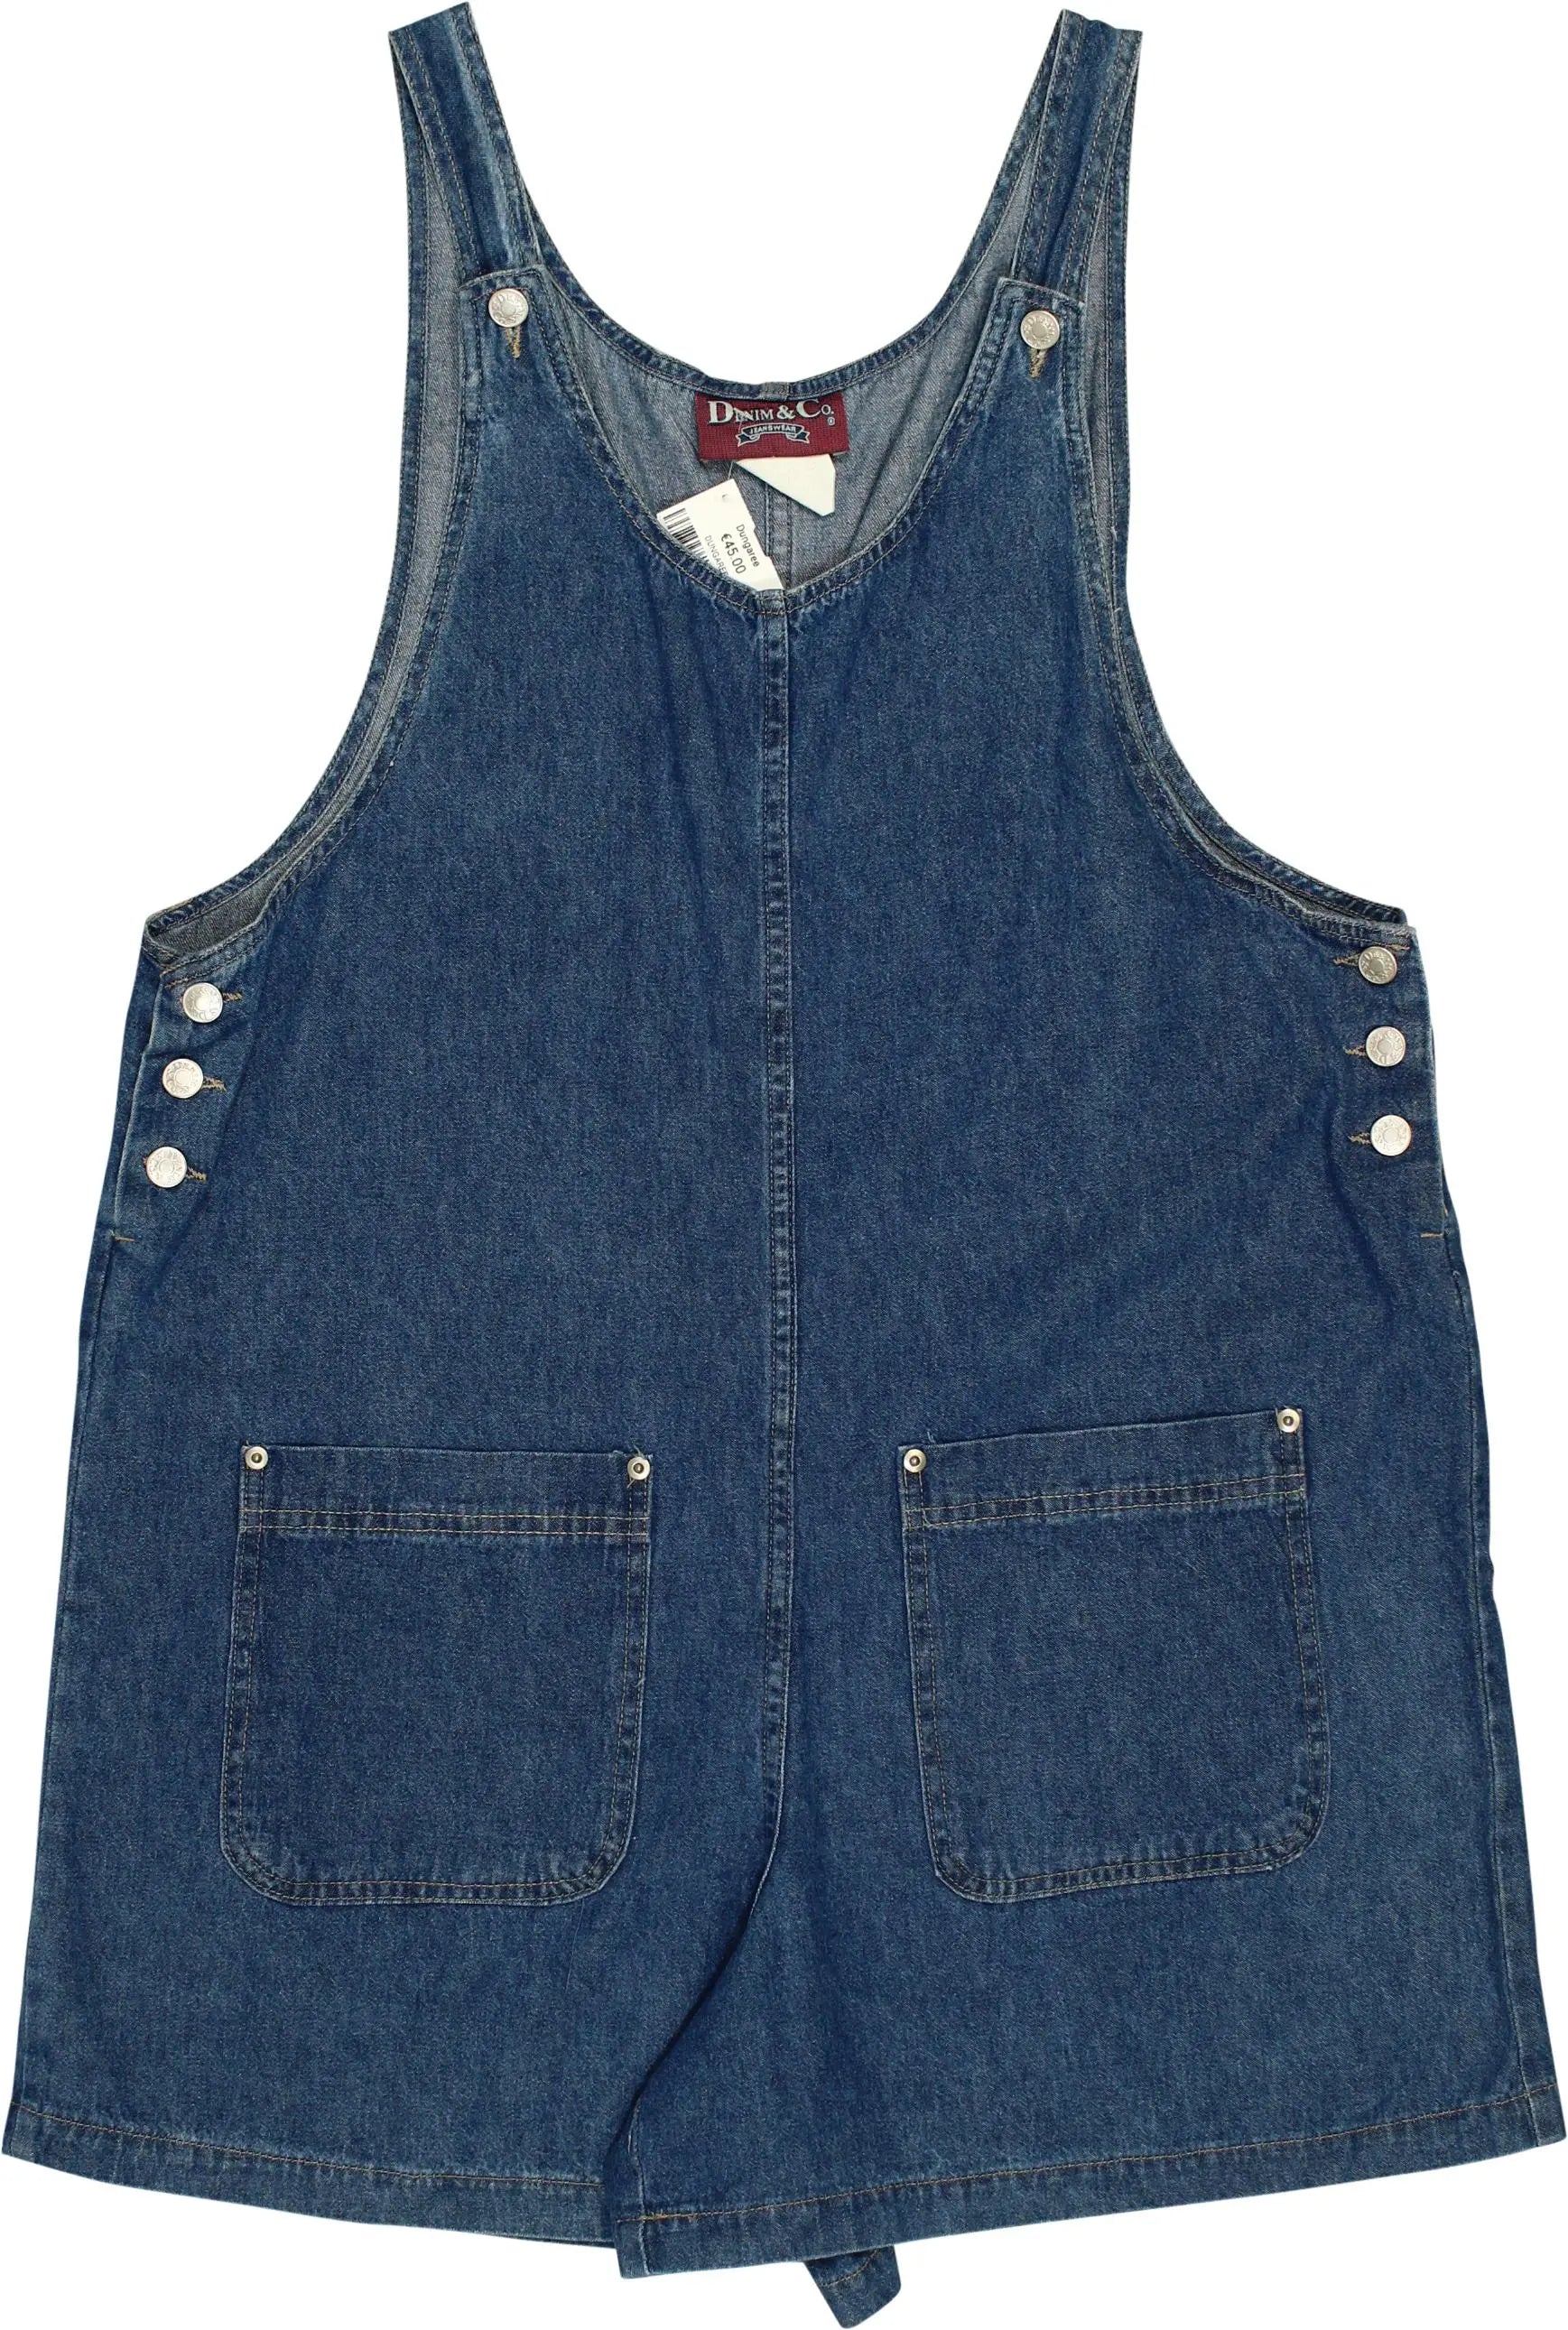 Denim & Co - 90s Short Denim Overall- ThriftTale.com - Vintage and second handclothing